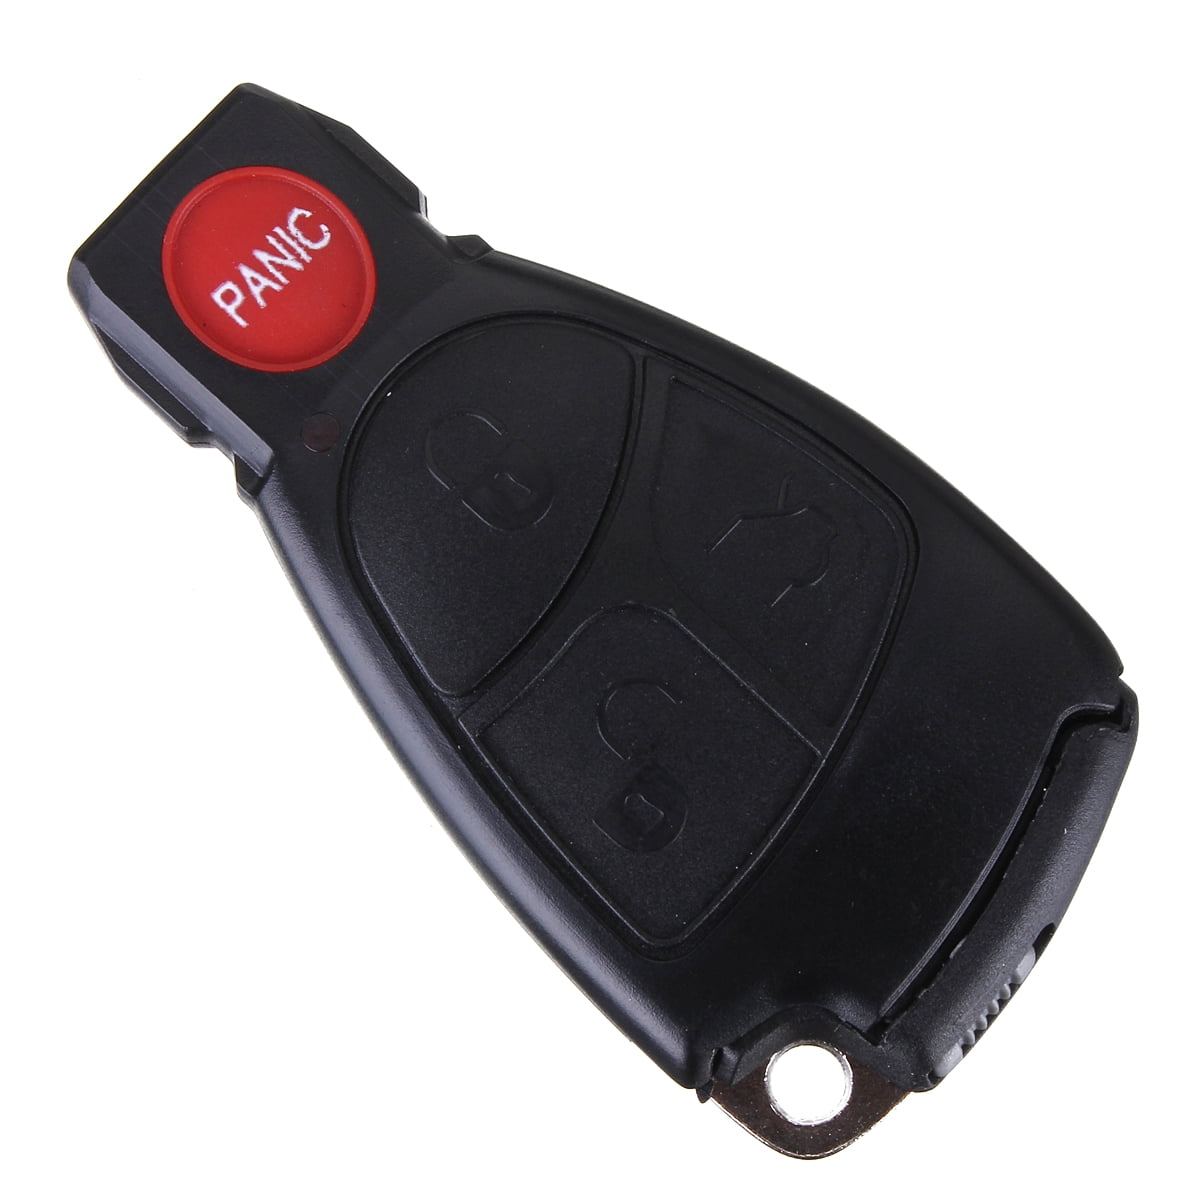 3 Buttons Remote Key Shell Case Replacement Fob for SMART Fortwo Mercedes Benz 